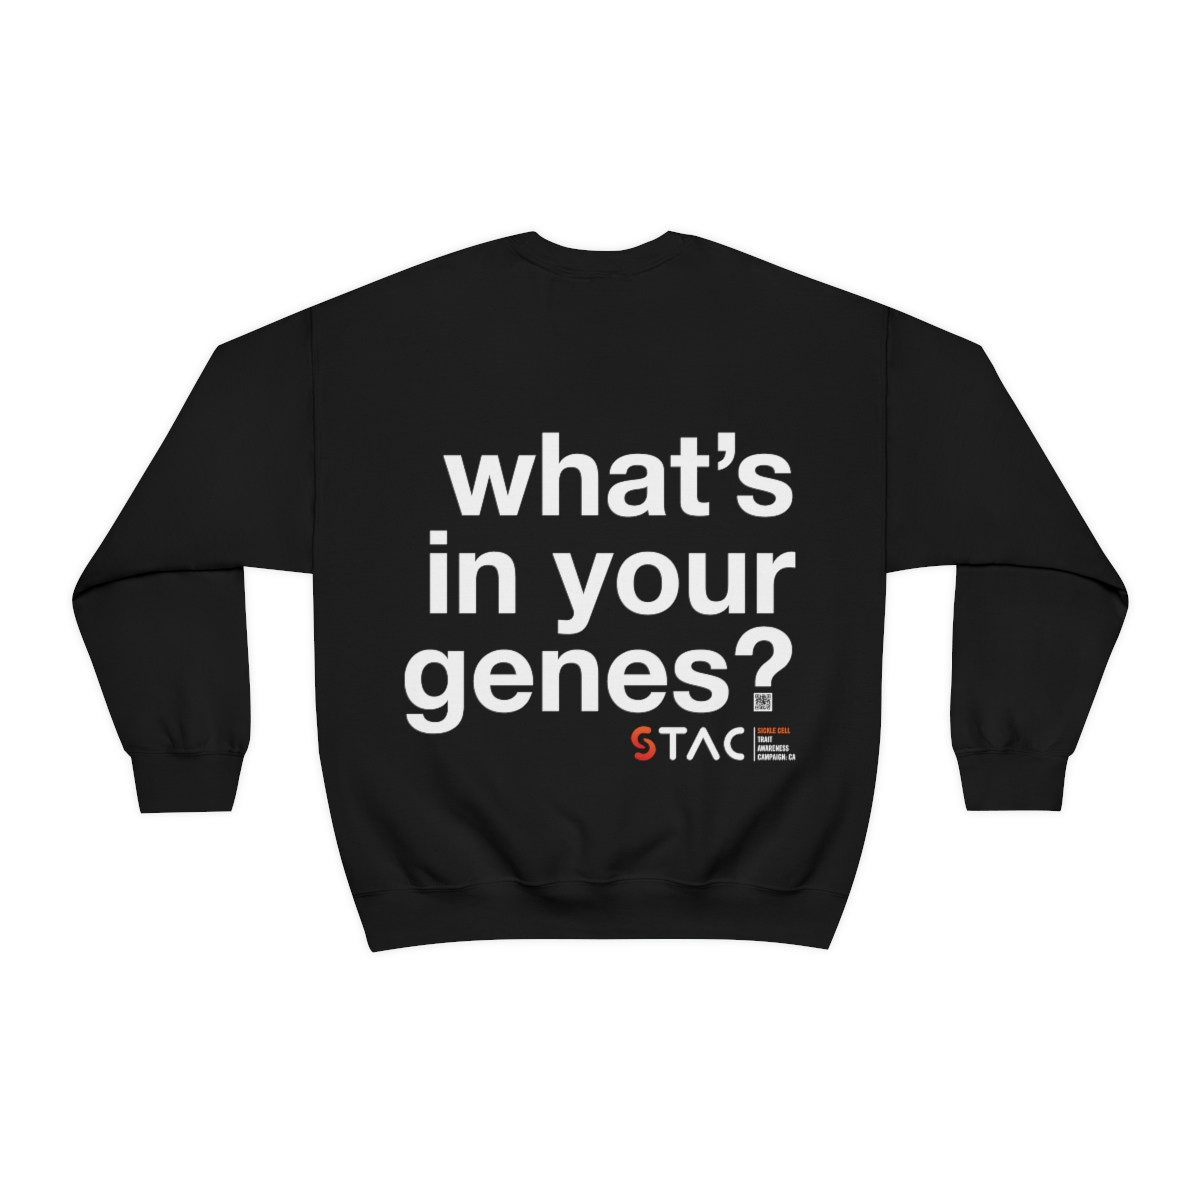 Rear view of a black sweatshirt, reading "what's in your genes?" on three large lines of text spanning the back. The STAC logo sits beneath this text, anchored to the right.